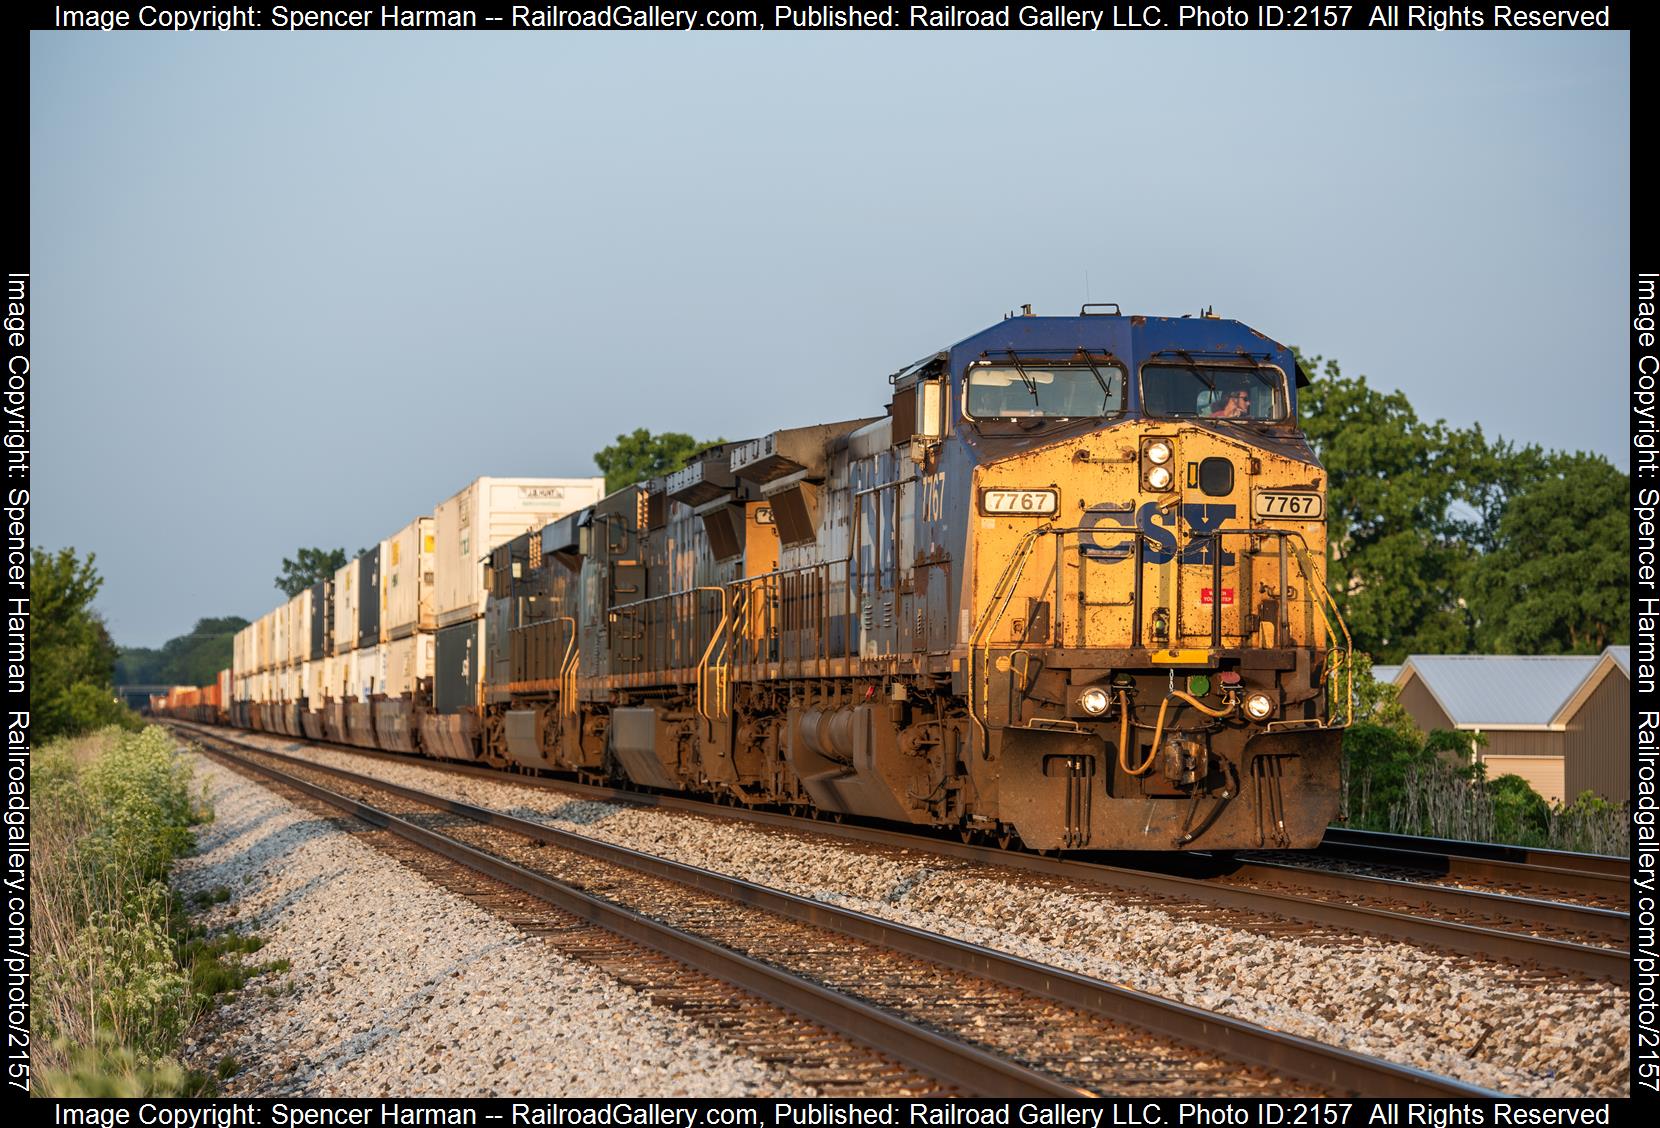 CSXT 7767 is a class GE C40-8W (Dash 8-40CW) and  is pictured in Garrett, Indiana, USA.  This was taken along the Garrett Subdivision on the CSX Transportation. Photo Copyright: Spencer Harman uploaded to Railroad Gallery on 06/23/2023. This photograph of CSXT 7767 was taken on Tuesday, June 20, 2023. All Rights Reserved. 